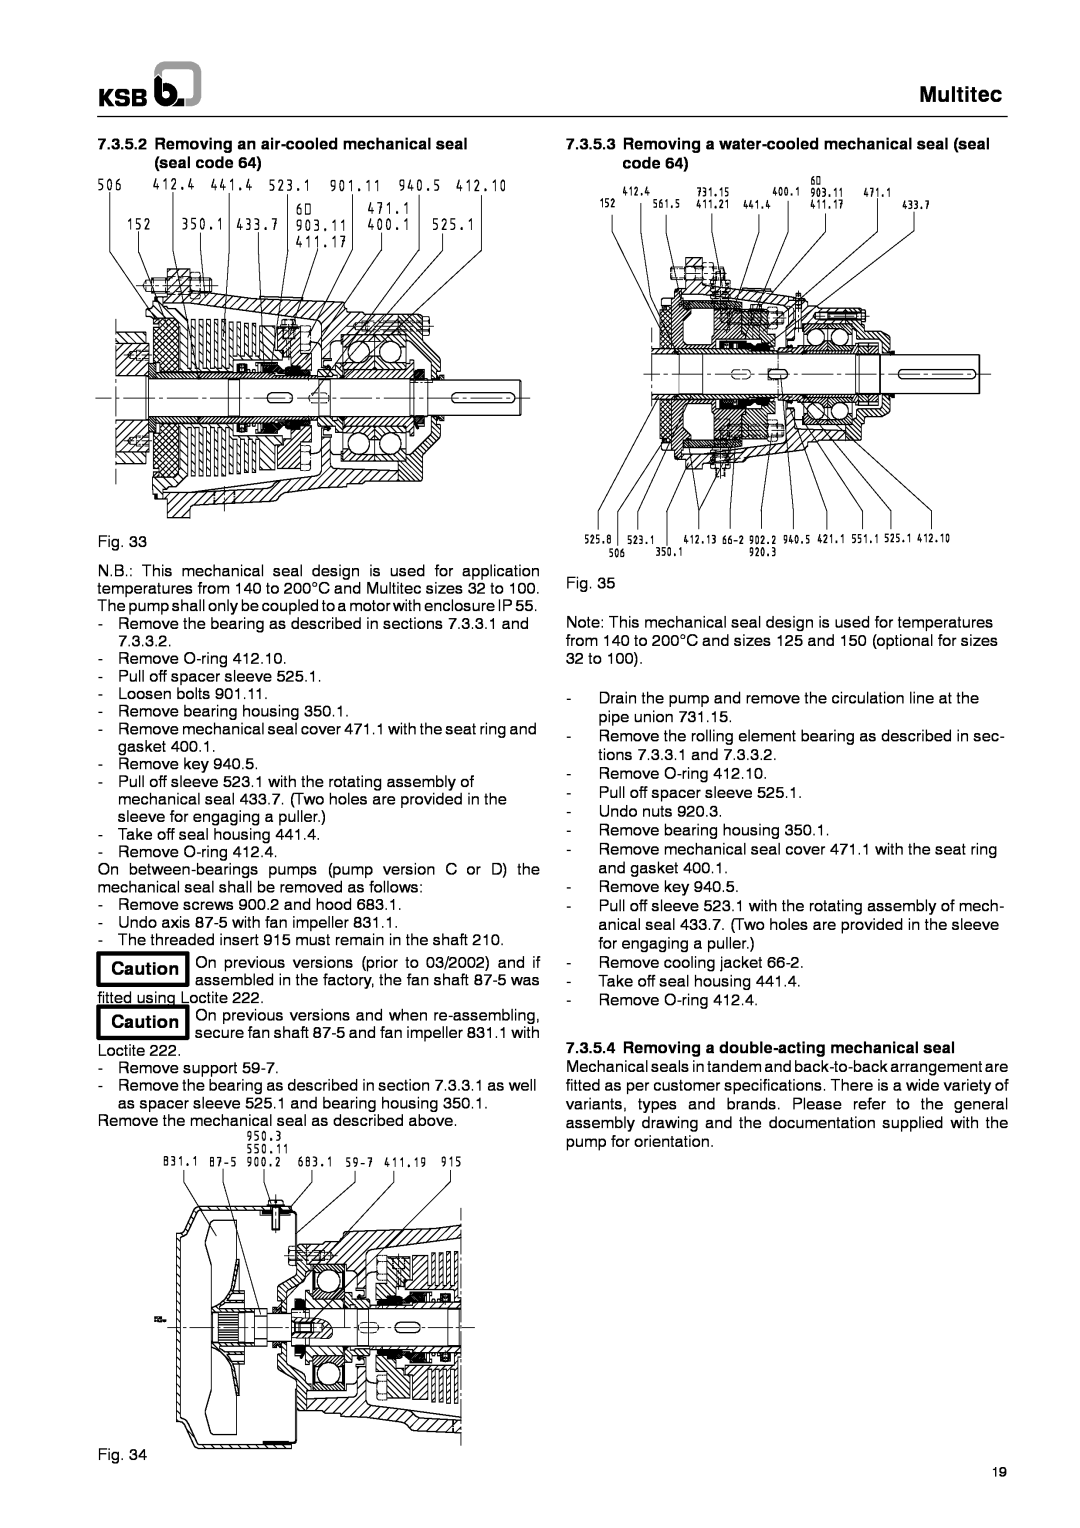 Multitech 1777.8/7-10 G3 operating instructions Multitec, Removing an air-cooledmechanical seal, seal code 